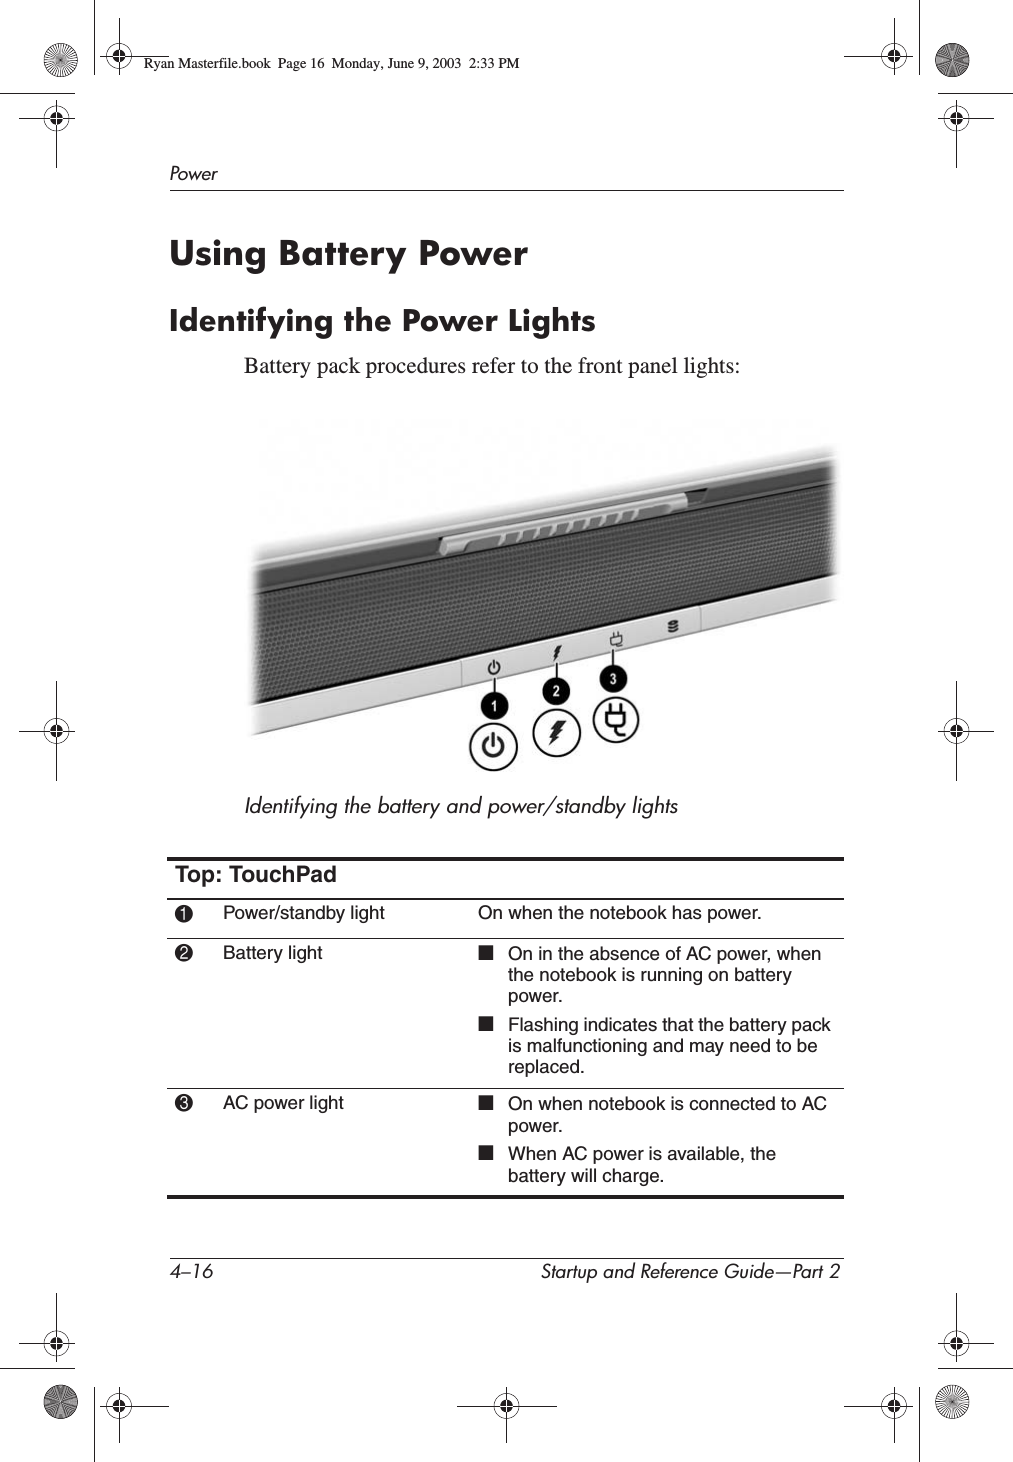 4–16 Startup and Reference Guide—Part 2PowerUsing Battery PowerIdentifying the Power LightsBattery pack procedures refer to the front panel lights:Identifying the battery and power/standby lightsTop: TouchPad1Power/standby light On when the notebook has power.2Battery light ■On in the absence of AC power, when the notebook is running on battery power.■Flashing indicates that the battery pack is malfunctioning and may need to be replaced.3AC power light ■On when notebook is connected to AC power.■When AC power is available, the battery will charge.Ryan Masterfile.book  Page 16  Monday, June 9, 2003  2:33 PM